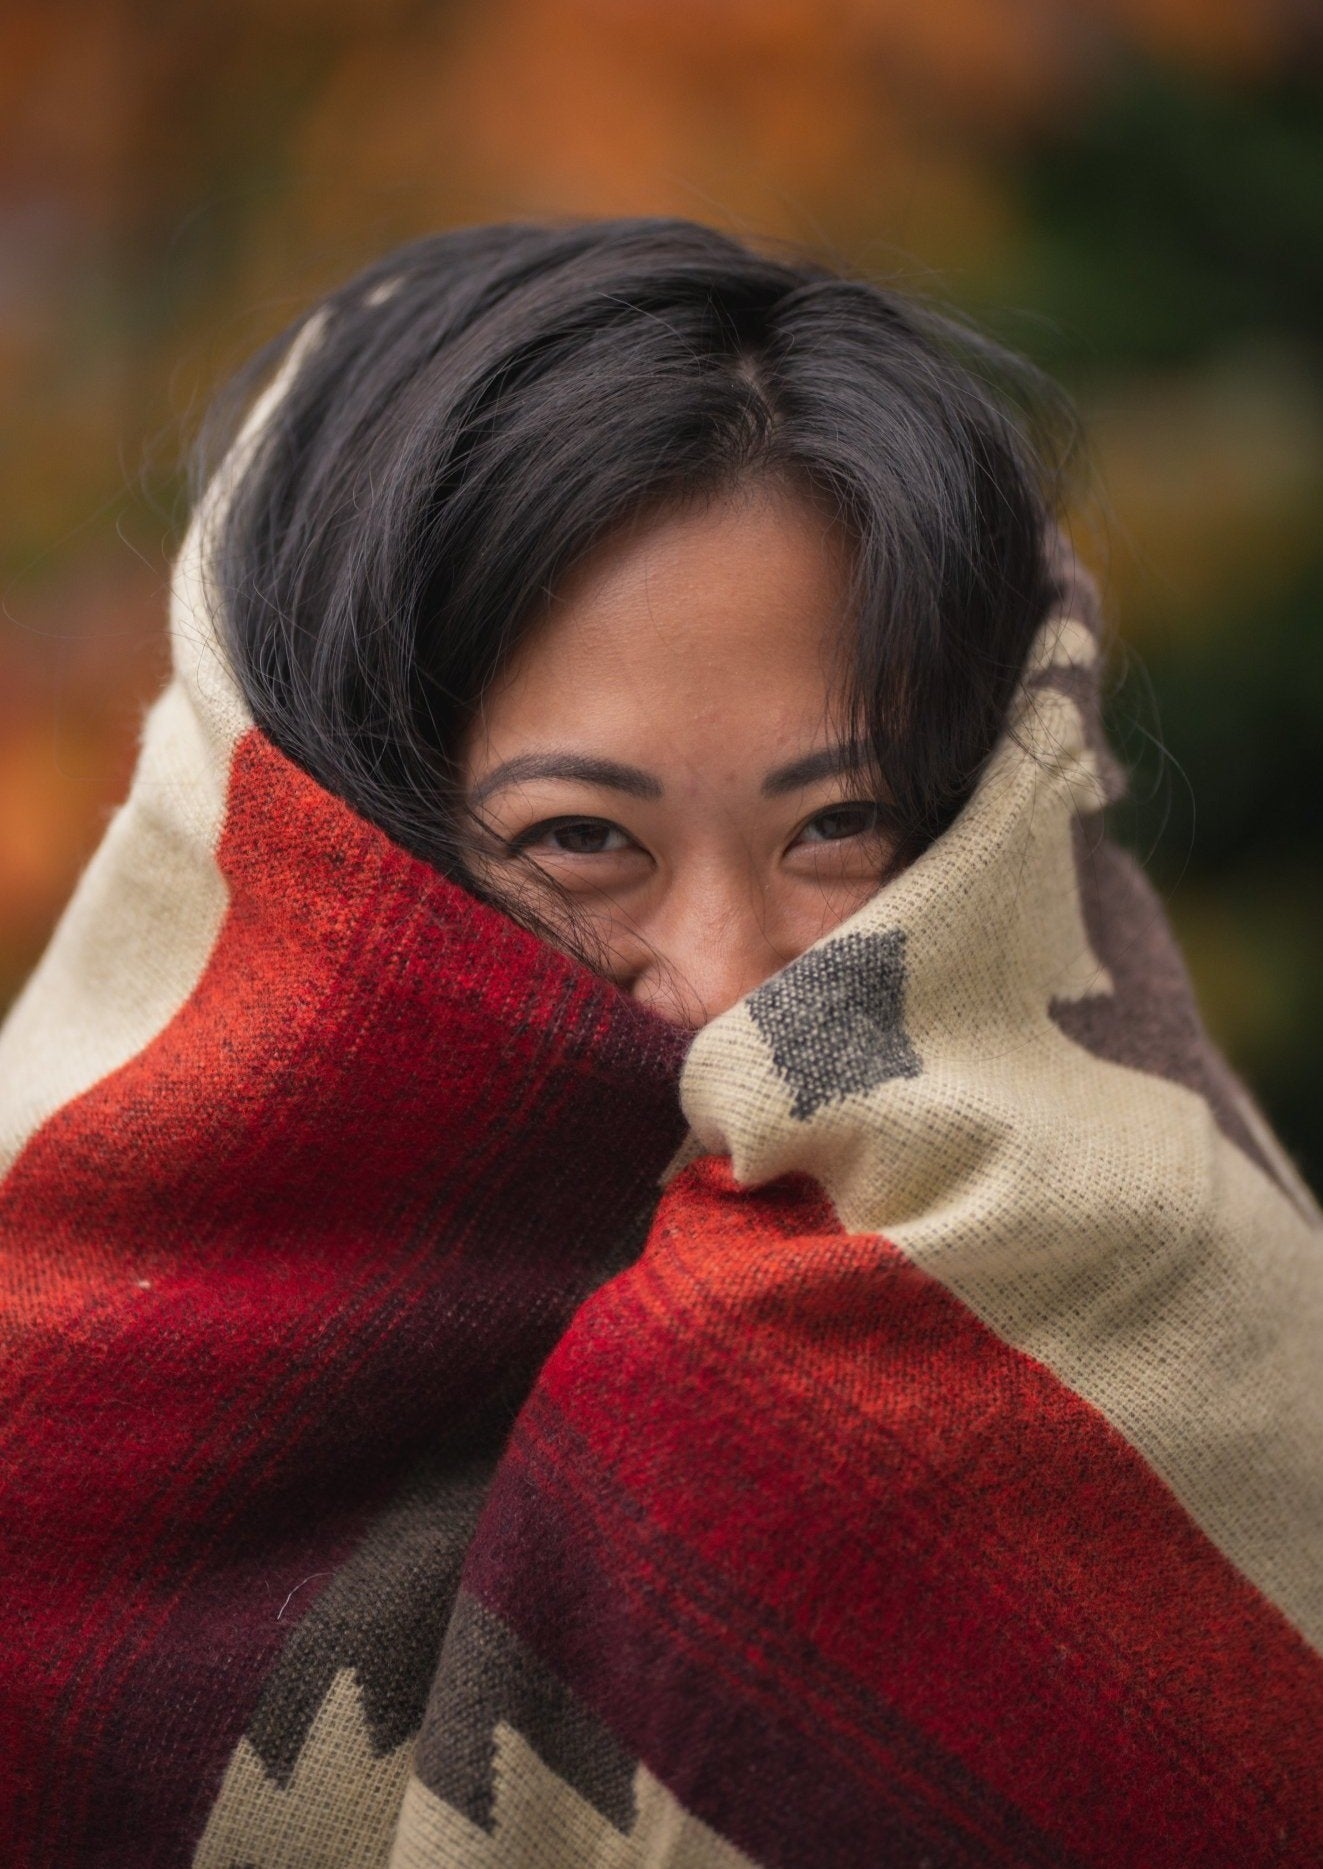 Asian girl wraps up in a cozy alpaca blanket outside during fall. The blanket keeps her face warm and her eyes are smiling. 